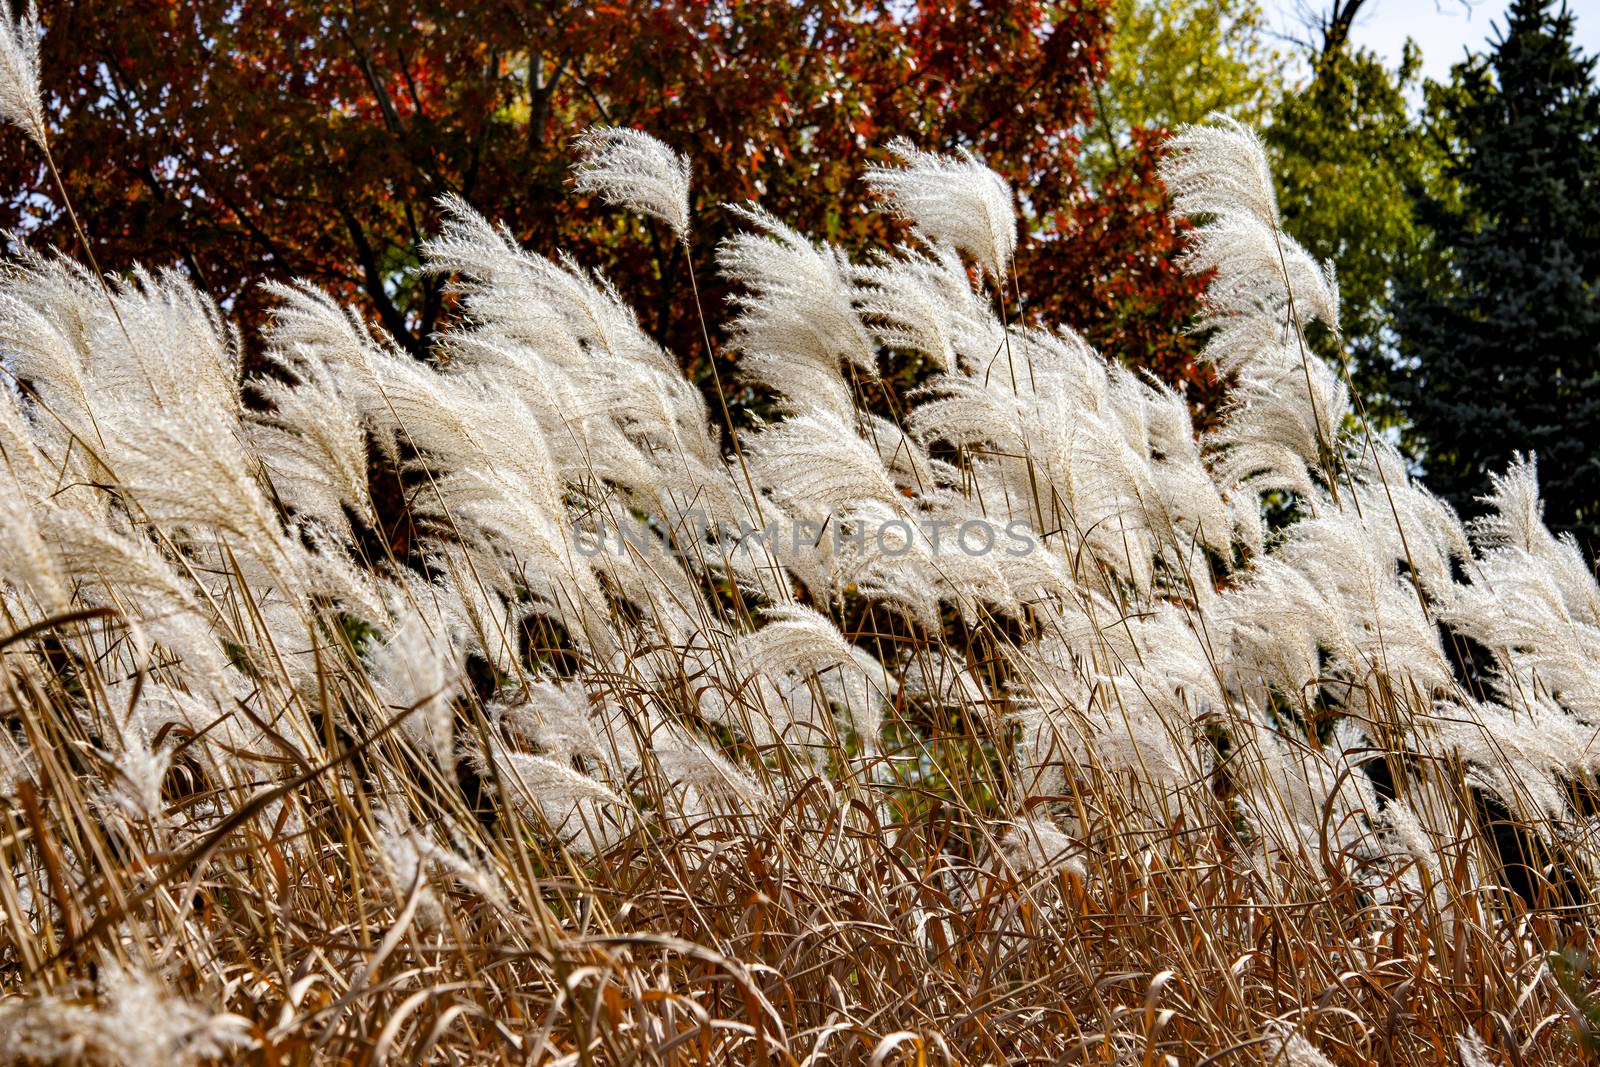 The wind shakes the white feathery grass on thin stems against the background of a tree with brown leaves